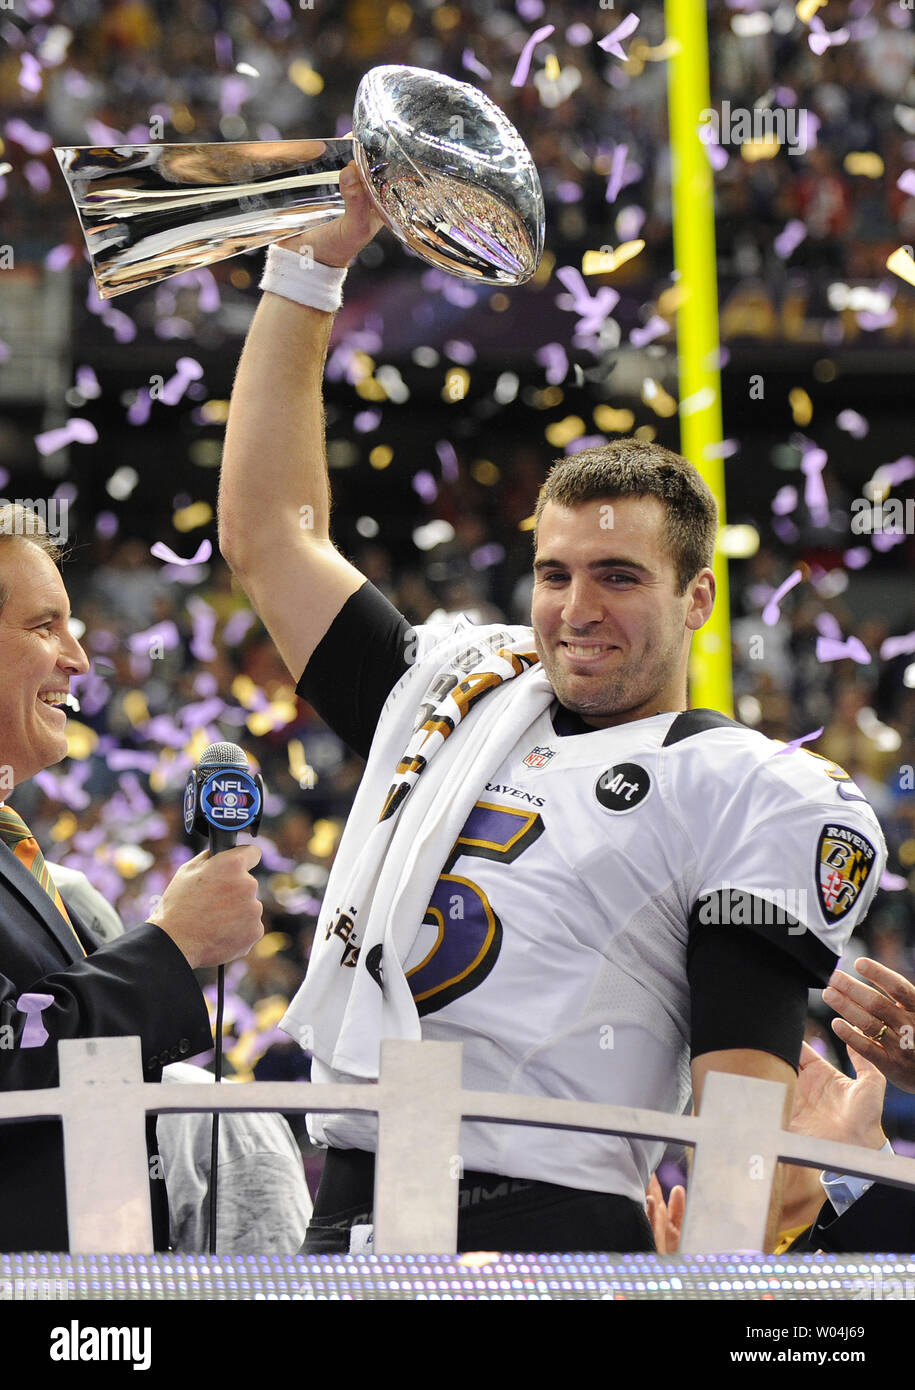 Baltimore Ravens quarterback Joe Flacco, Super Bowl MVP, holds the Lombardi  trophy at Super Bowl XLVII at the Mercedes-Benz Superdome on February 3,  2013 in New Orleans. Baltimore beats San Francisco 34-31